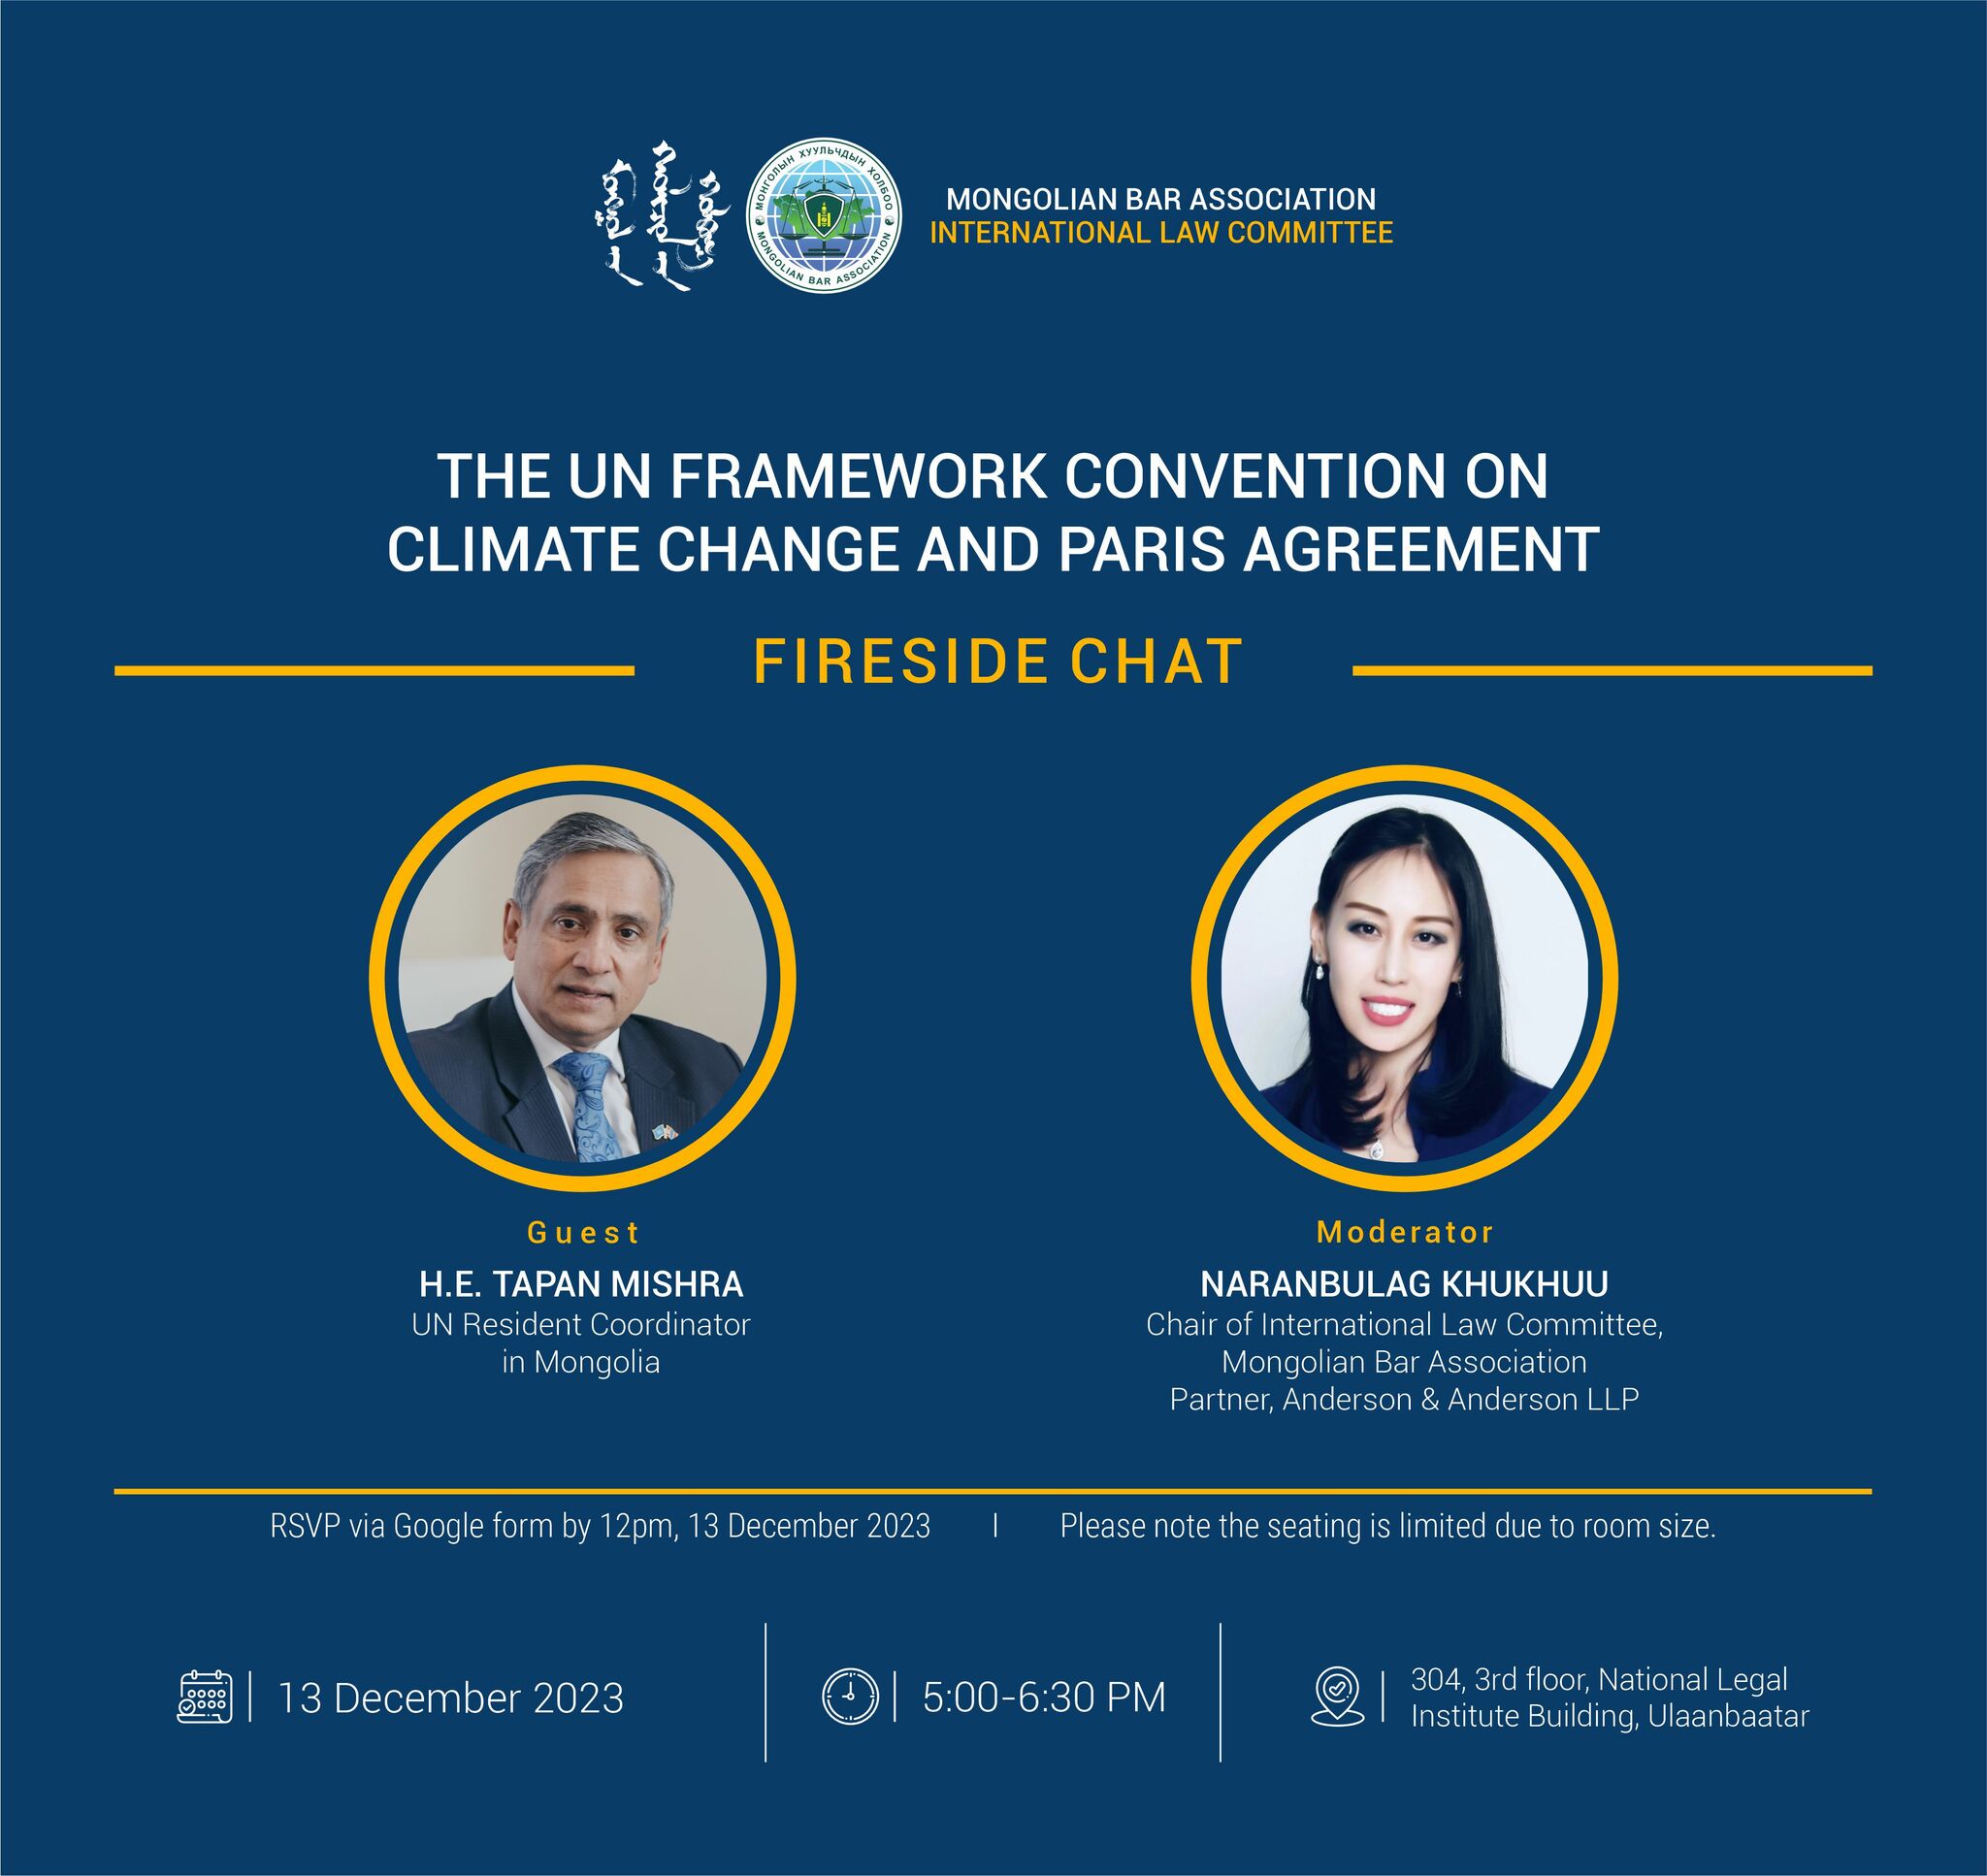 “THE UNITED NATIONS FRAMEWORK CONVENTION ON CLIMATE CHANGE AND PARIS AGREEMENT” FIRESIDE CHAT